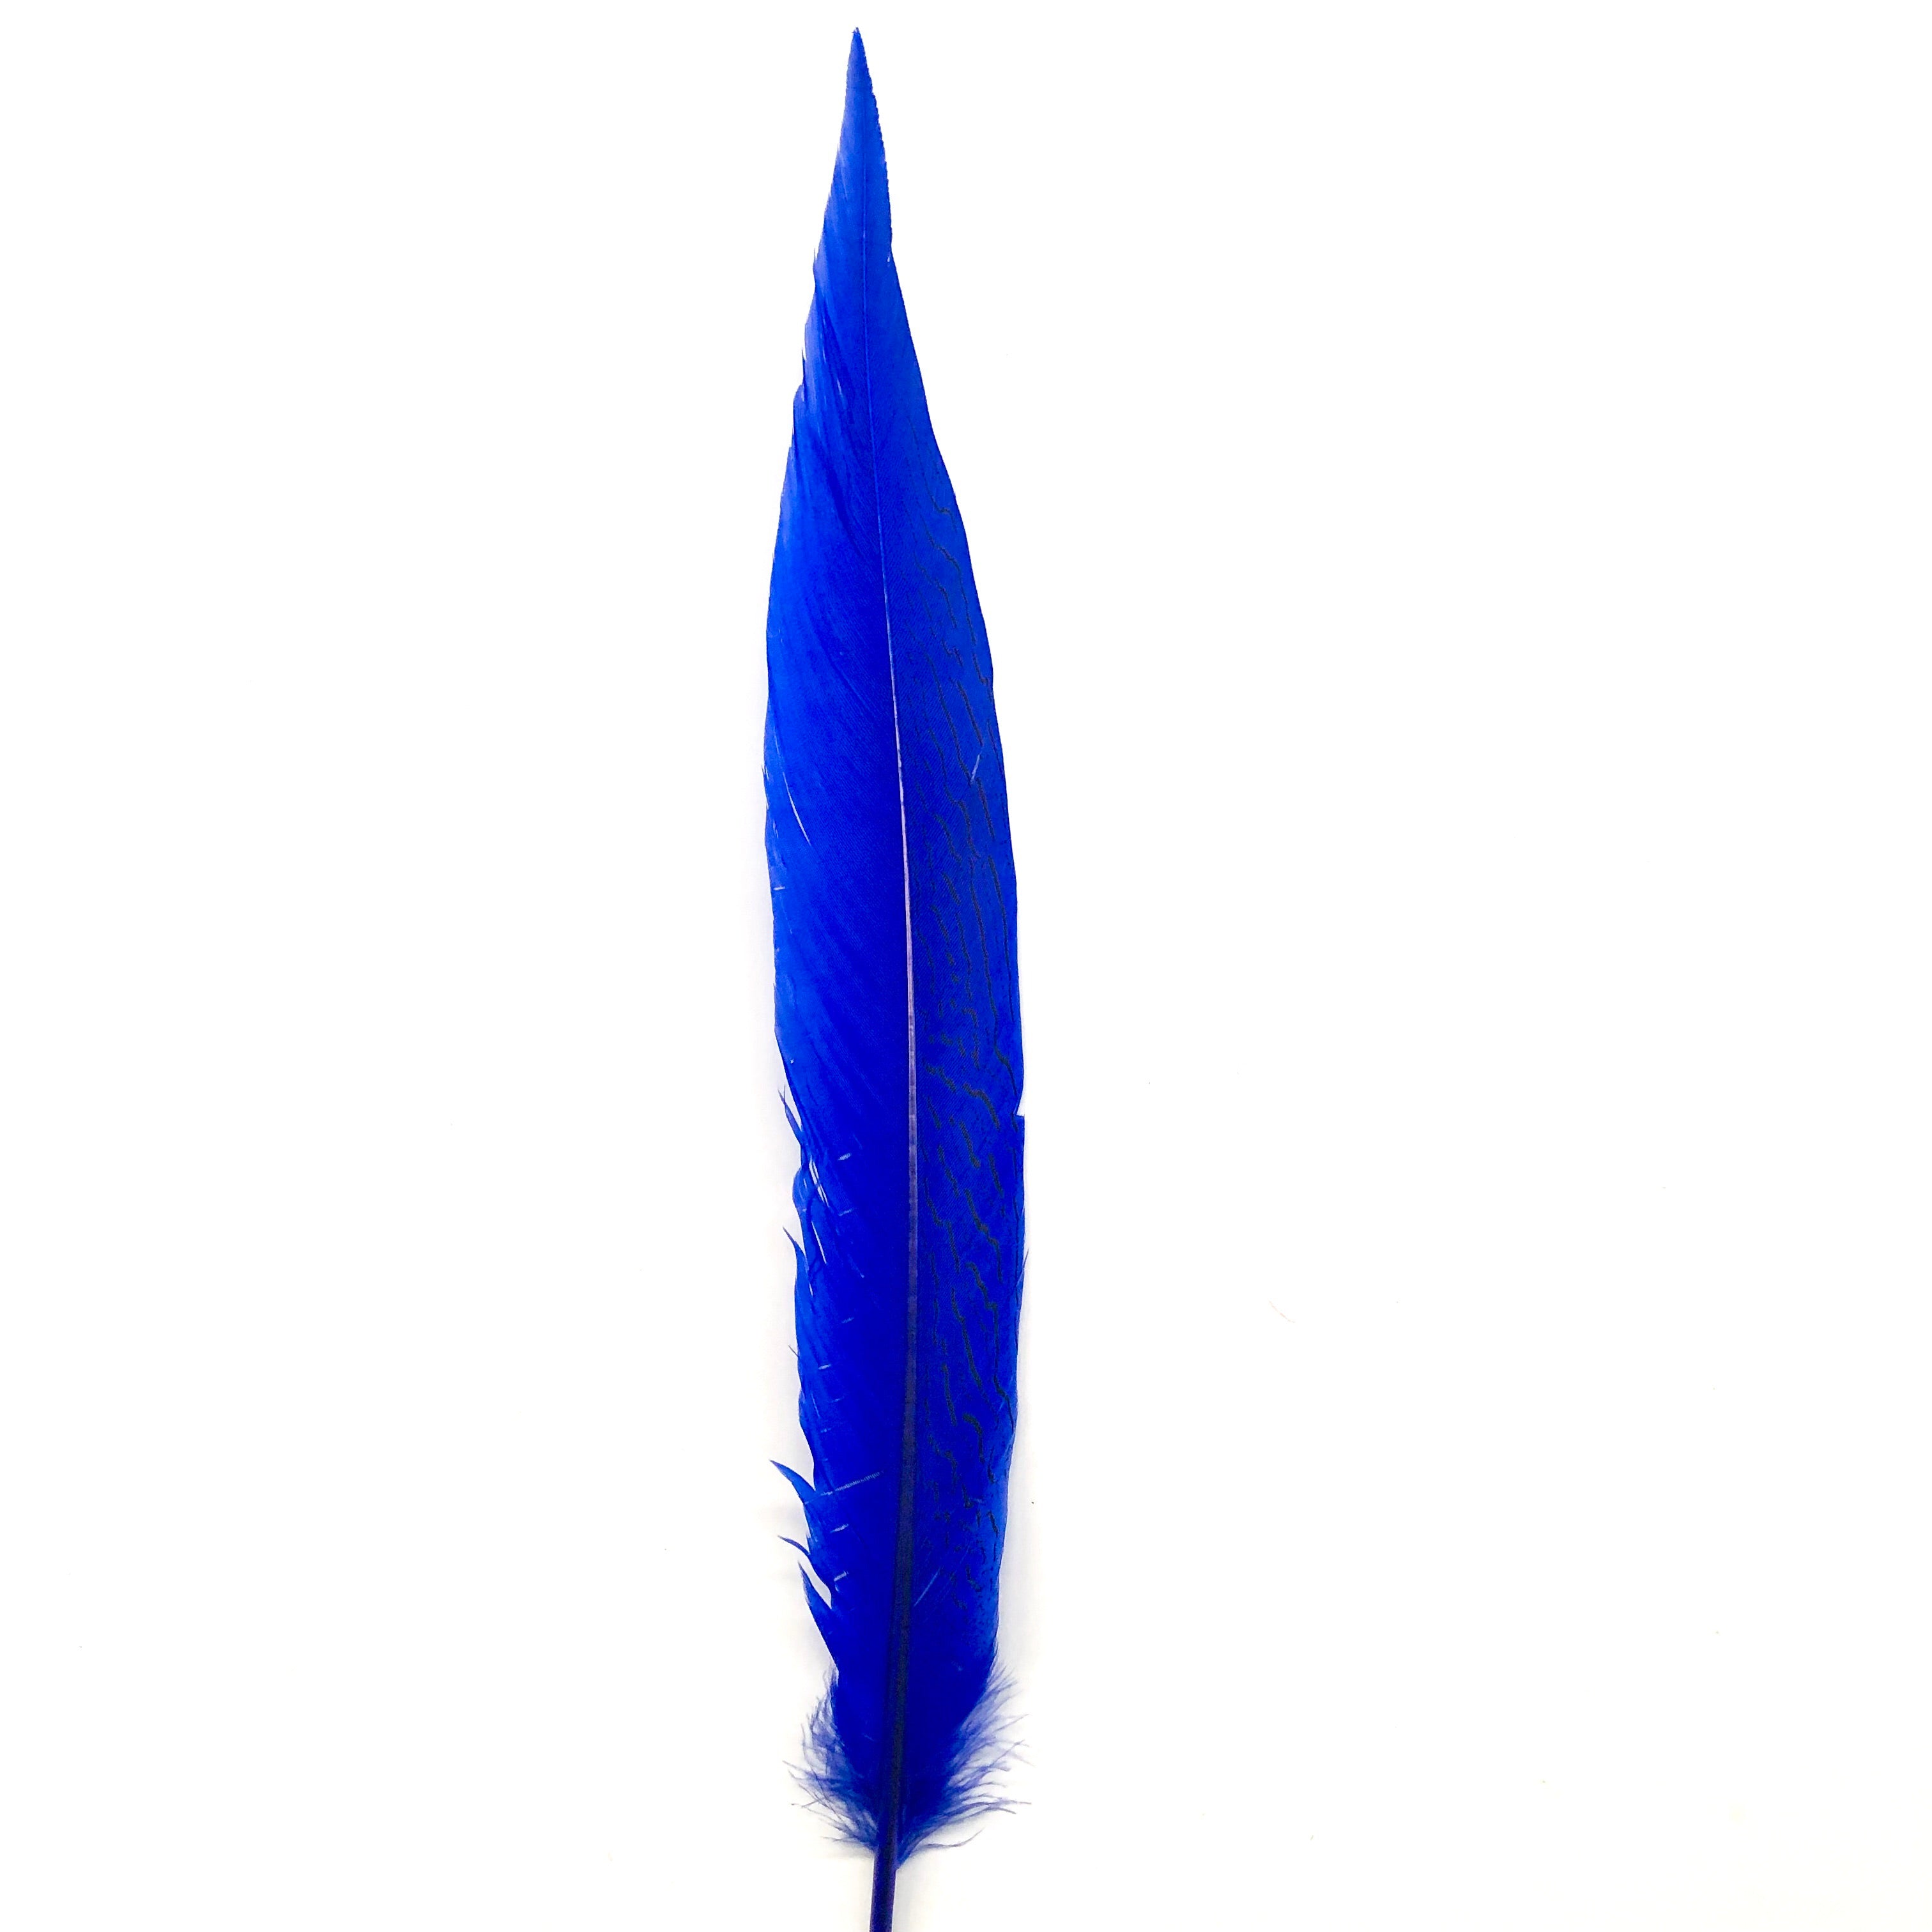 6" to 10" Silver Pheasant Tail Feather - Royal Blue